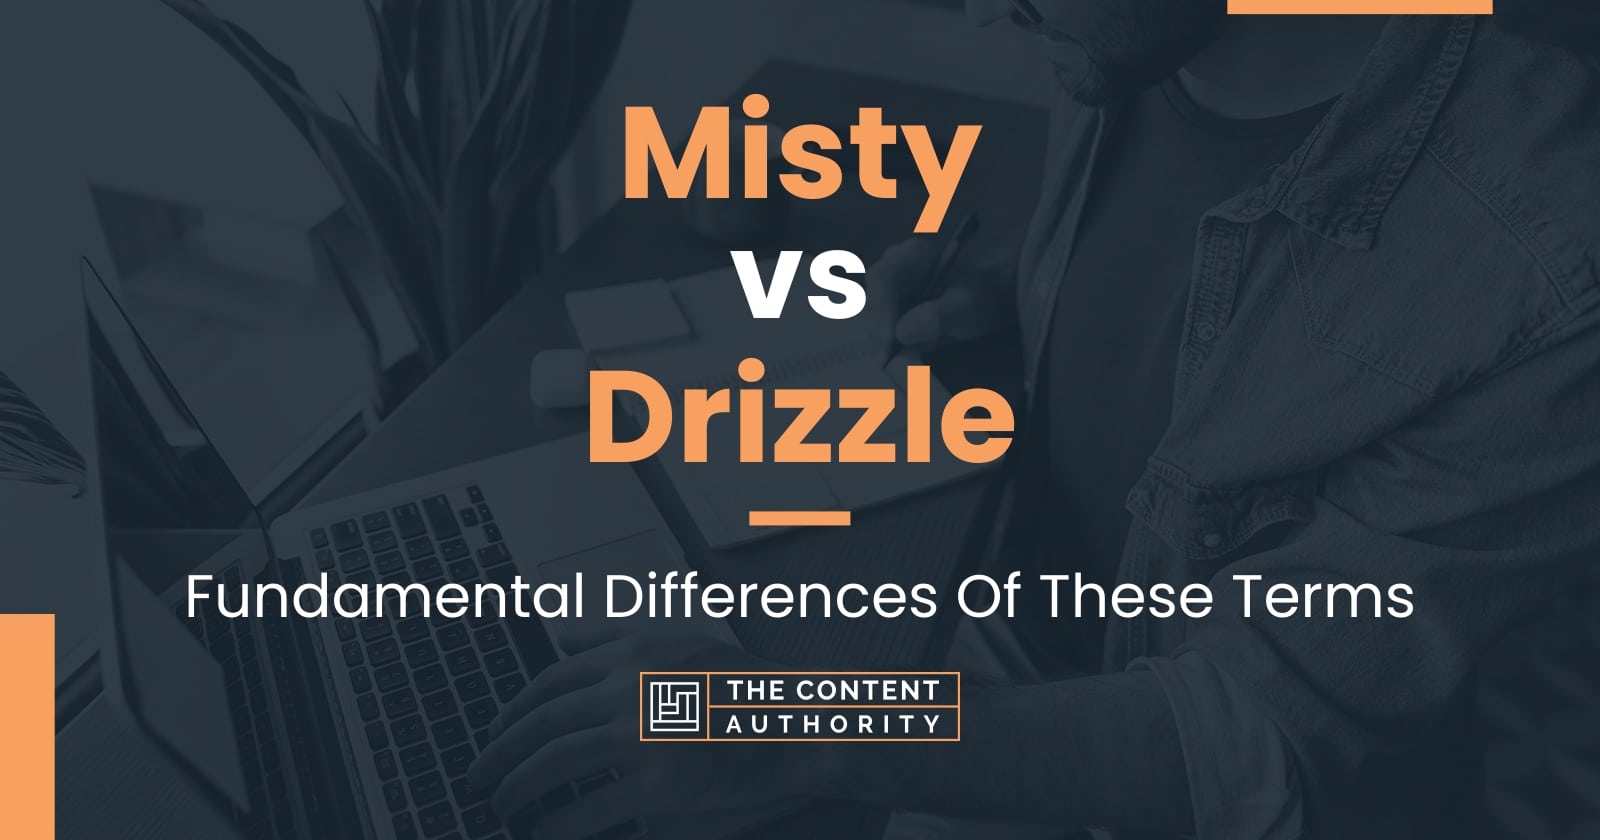 Misty vs Drizzle: Fundamental Differences Of These Terms